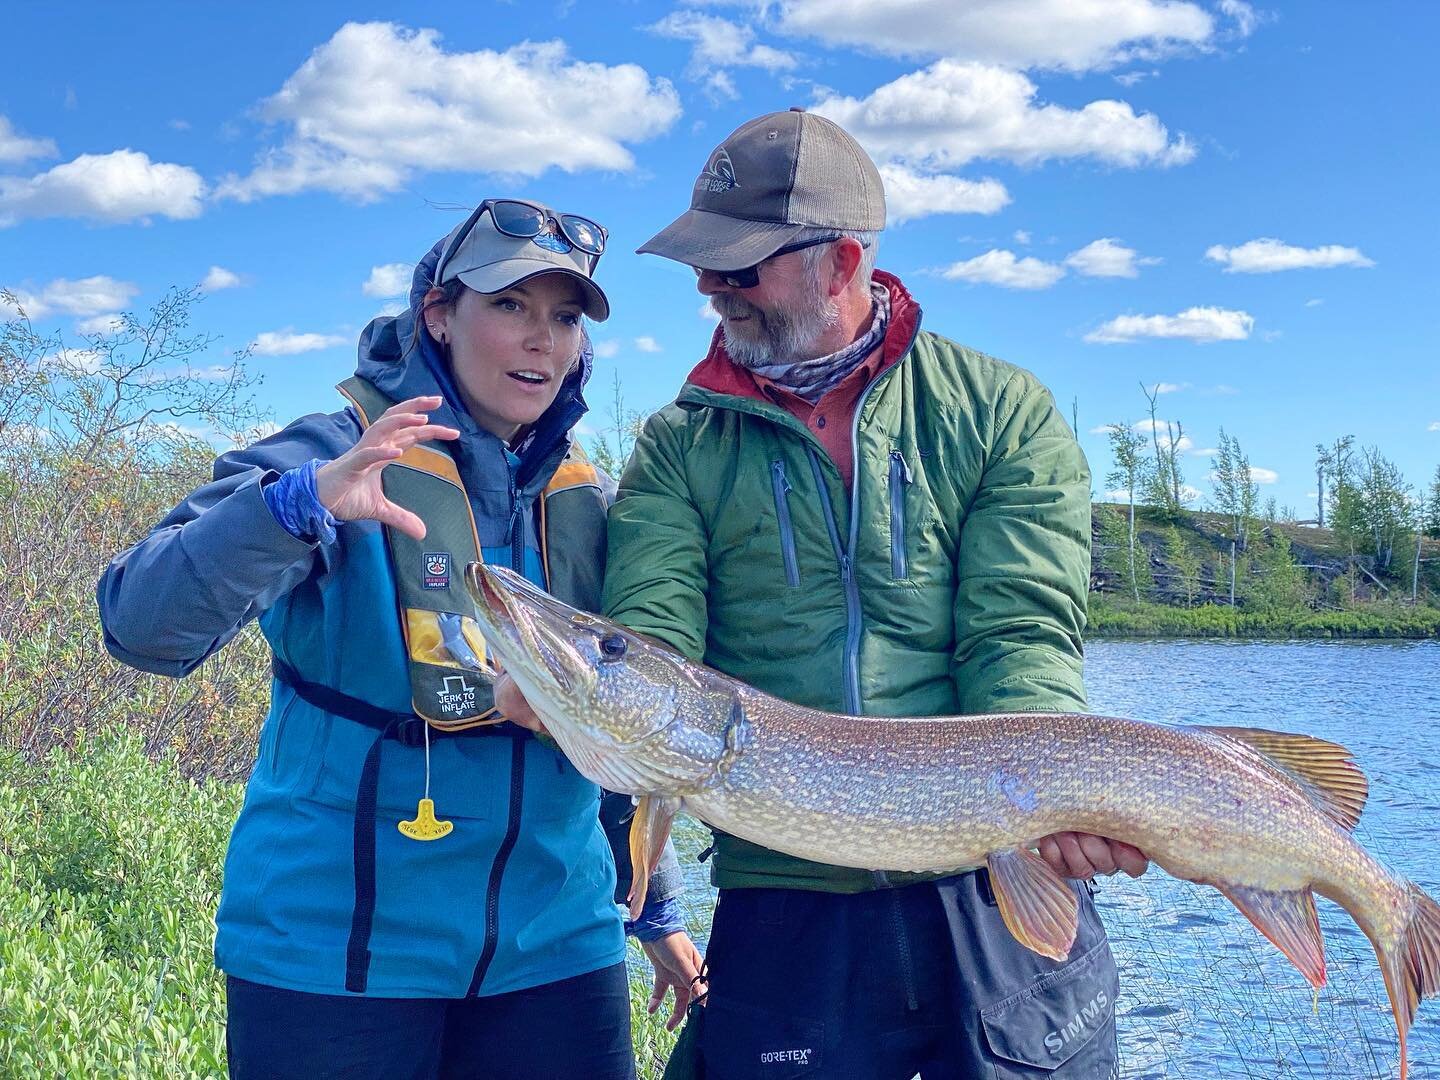 Flashing back to @creeriverlodge where @fishinchipoutdoors had to watch my re-enactment of this pike take 83,726,282 times 😇
-
@theofficialnewflyfisher @orvis